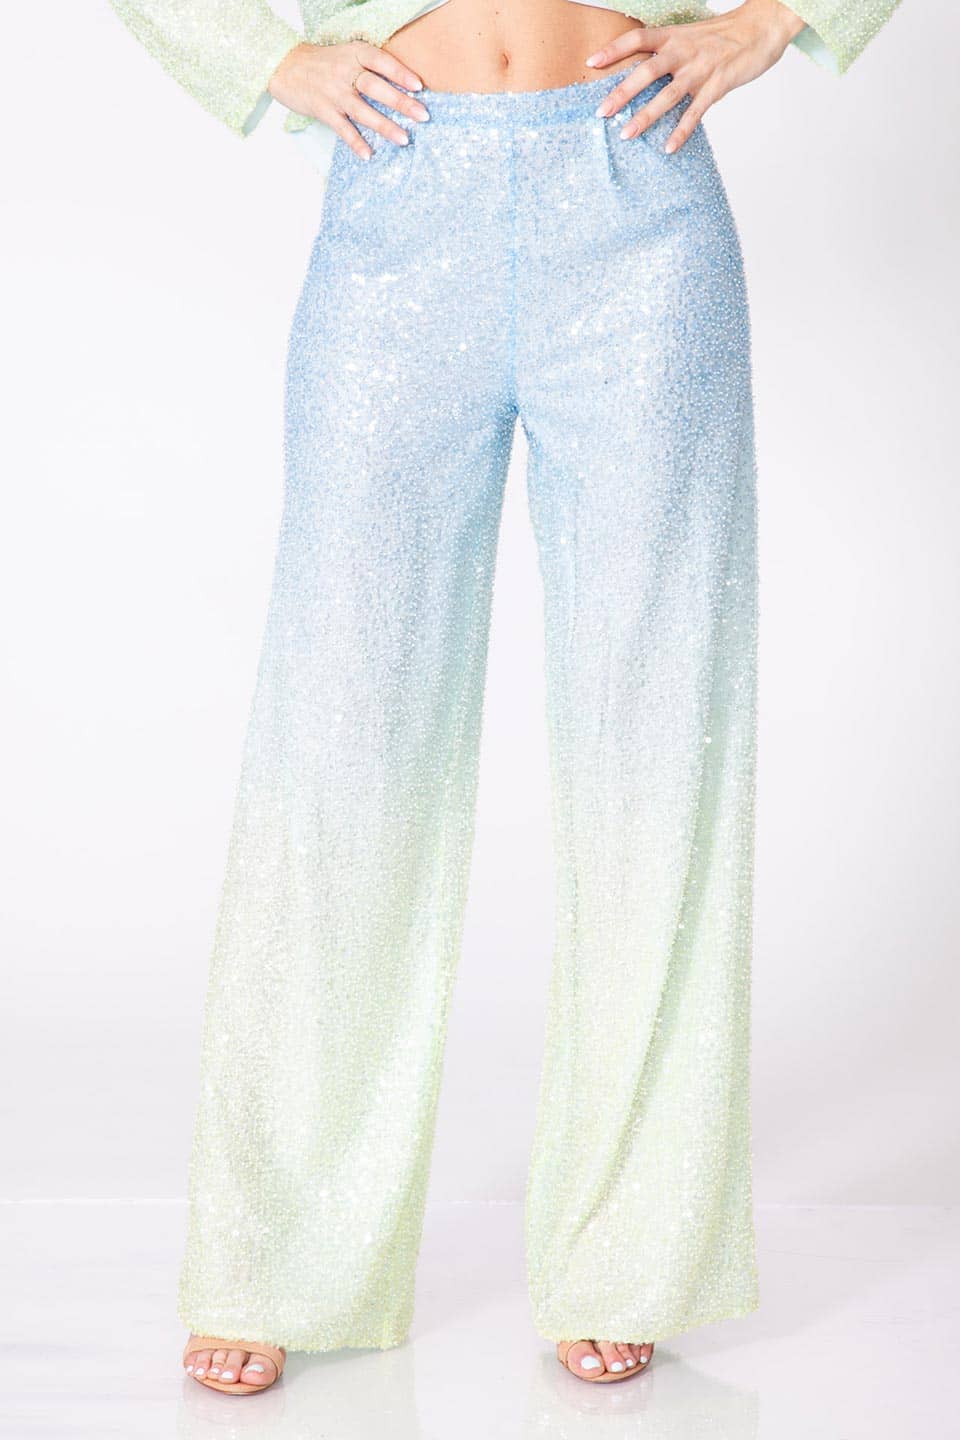 Thumbnail for Product gallery 5, Trendy trousers for women in blue color. Shop online designer Pants for special occasions